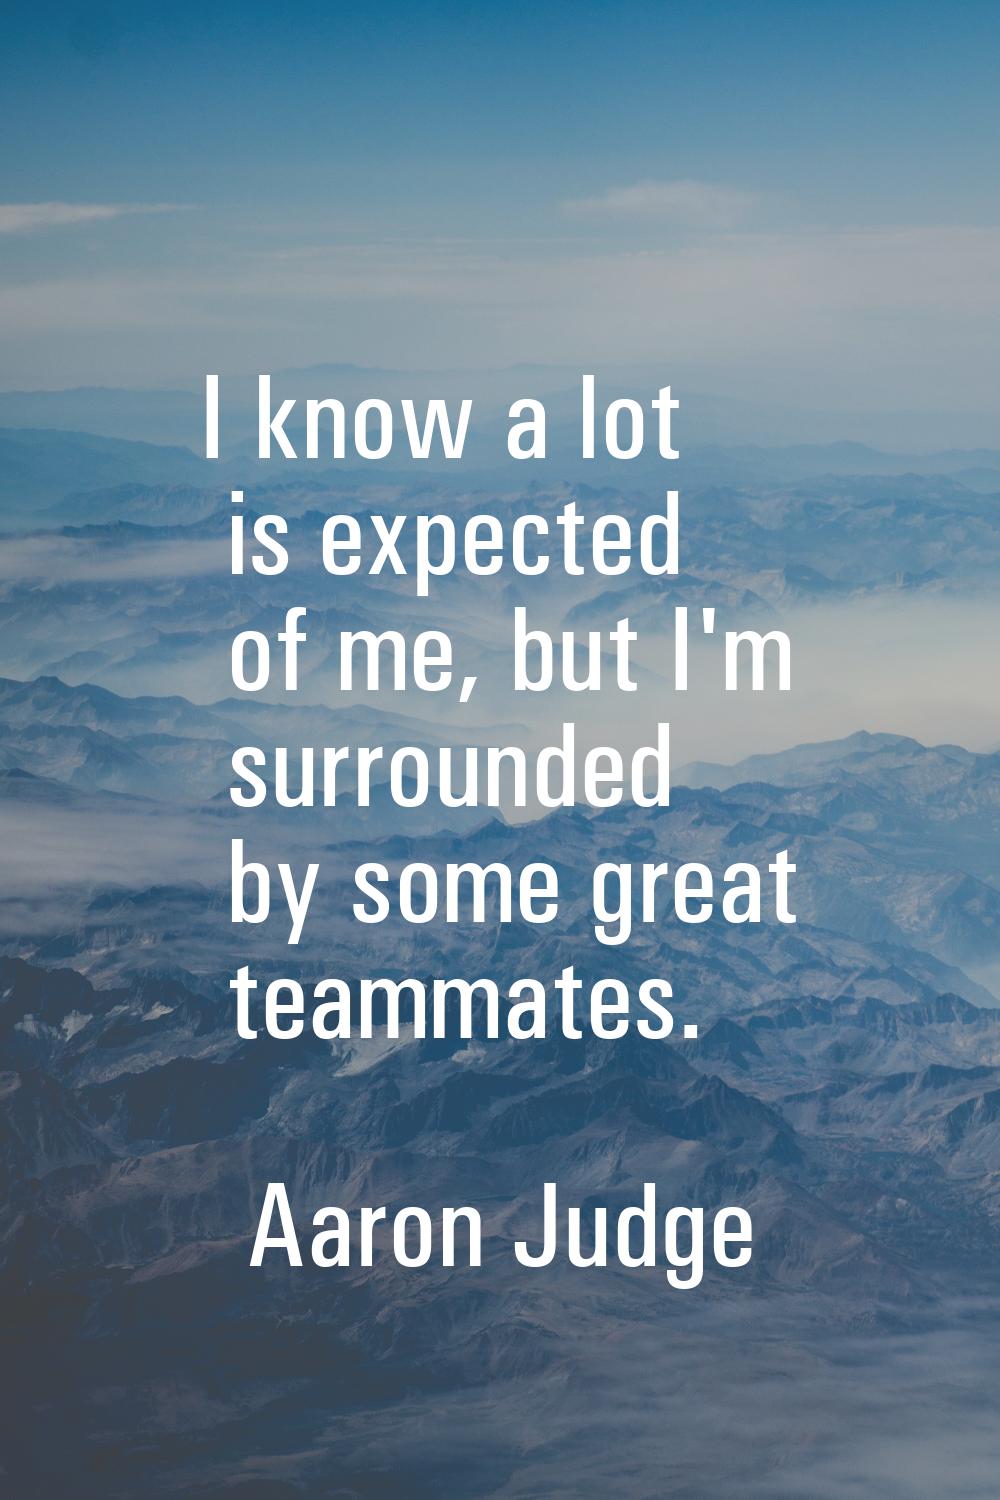 I know a lot is expected of me, but I'm surrounded by some great teammates.